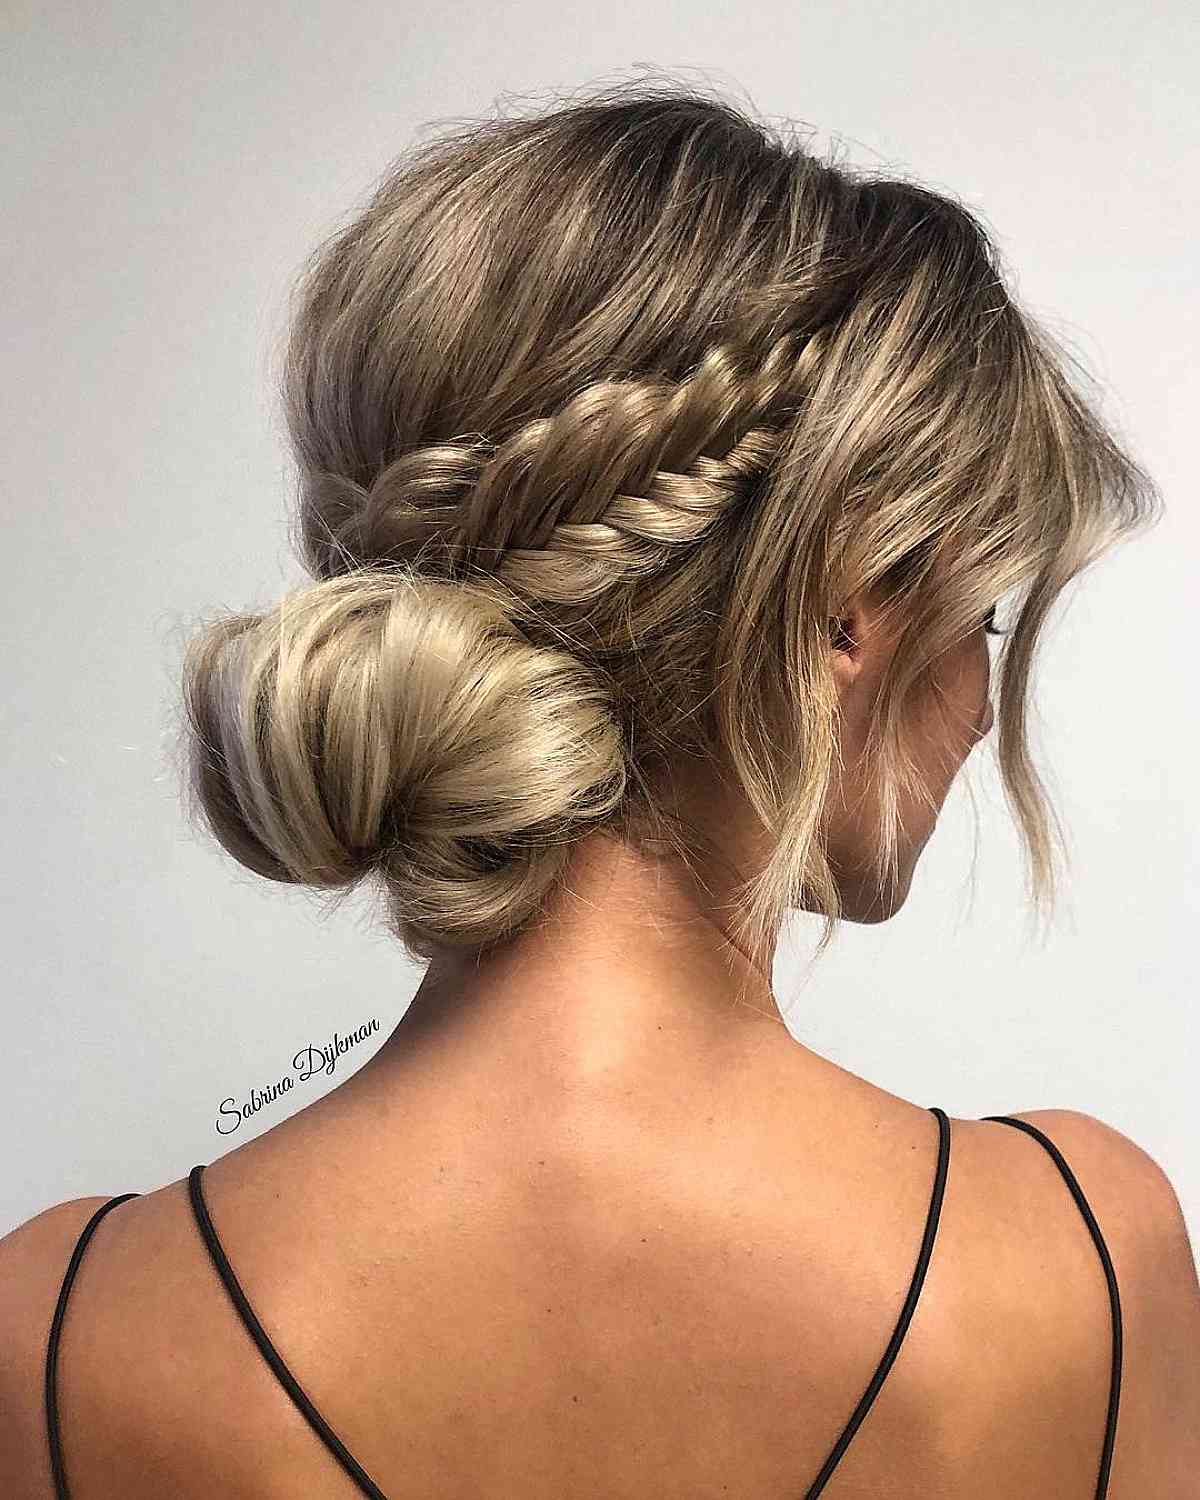 New] The 10 Best Hairstyles (with Pictures) - Around the world - ___ Happy earth  day! I did a simple earth day insp… | Cool hairstyles, Hair styles, Nyx  cosmetics